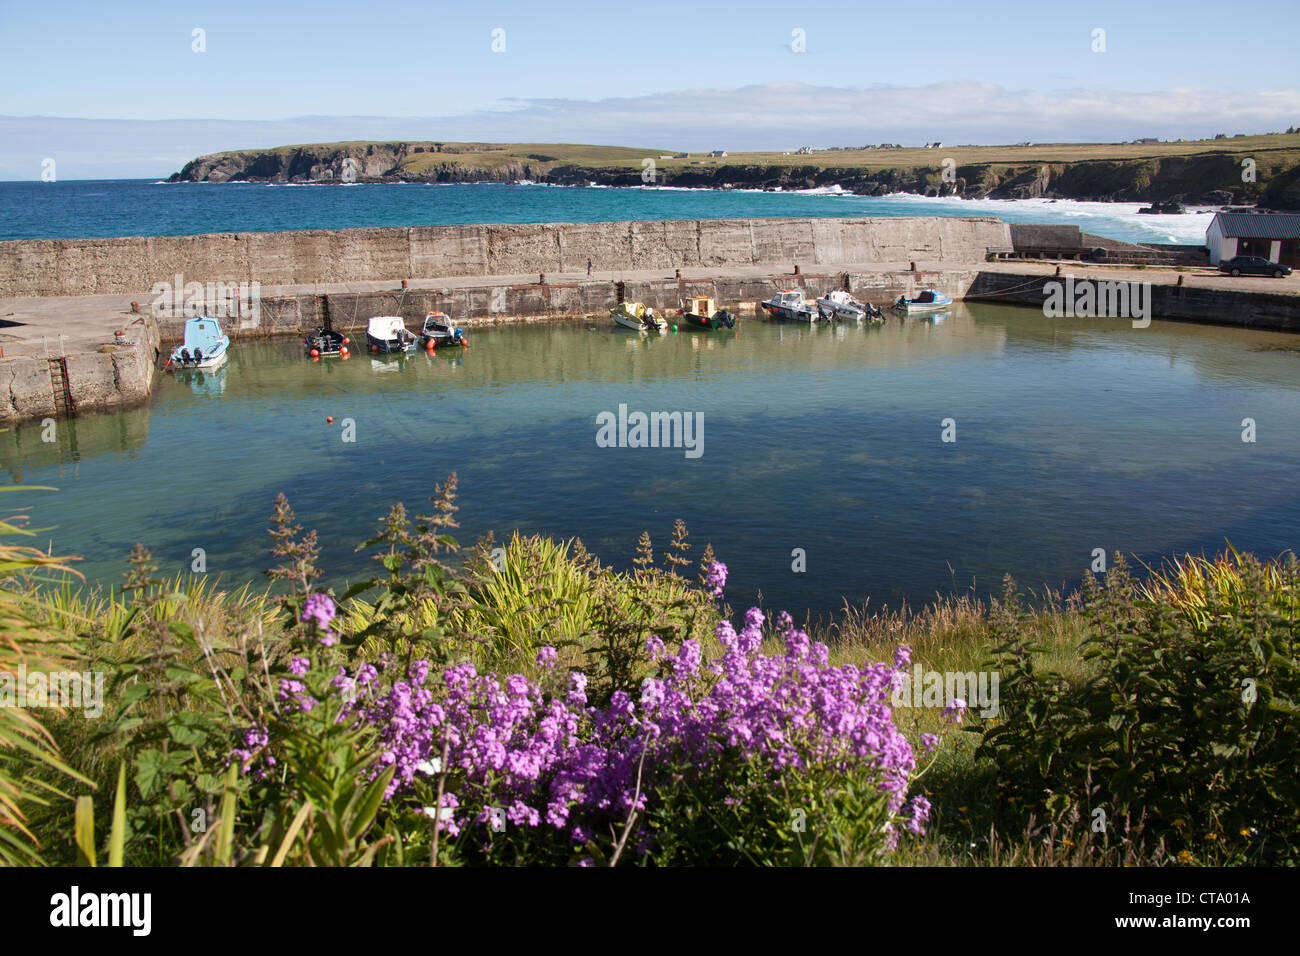 Isle of Lewis, Scotland. Small fishing boats tied up alongside the picturesque Port Nis Harbour. Stock Photo